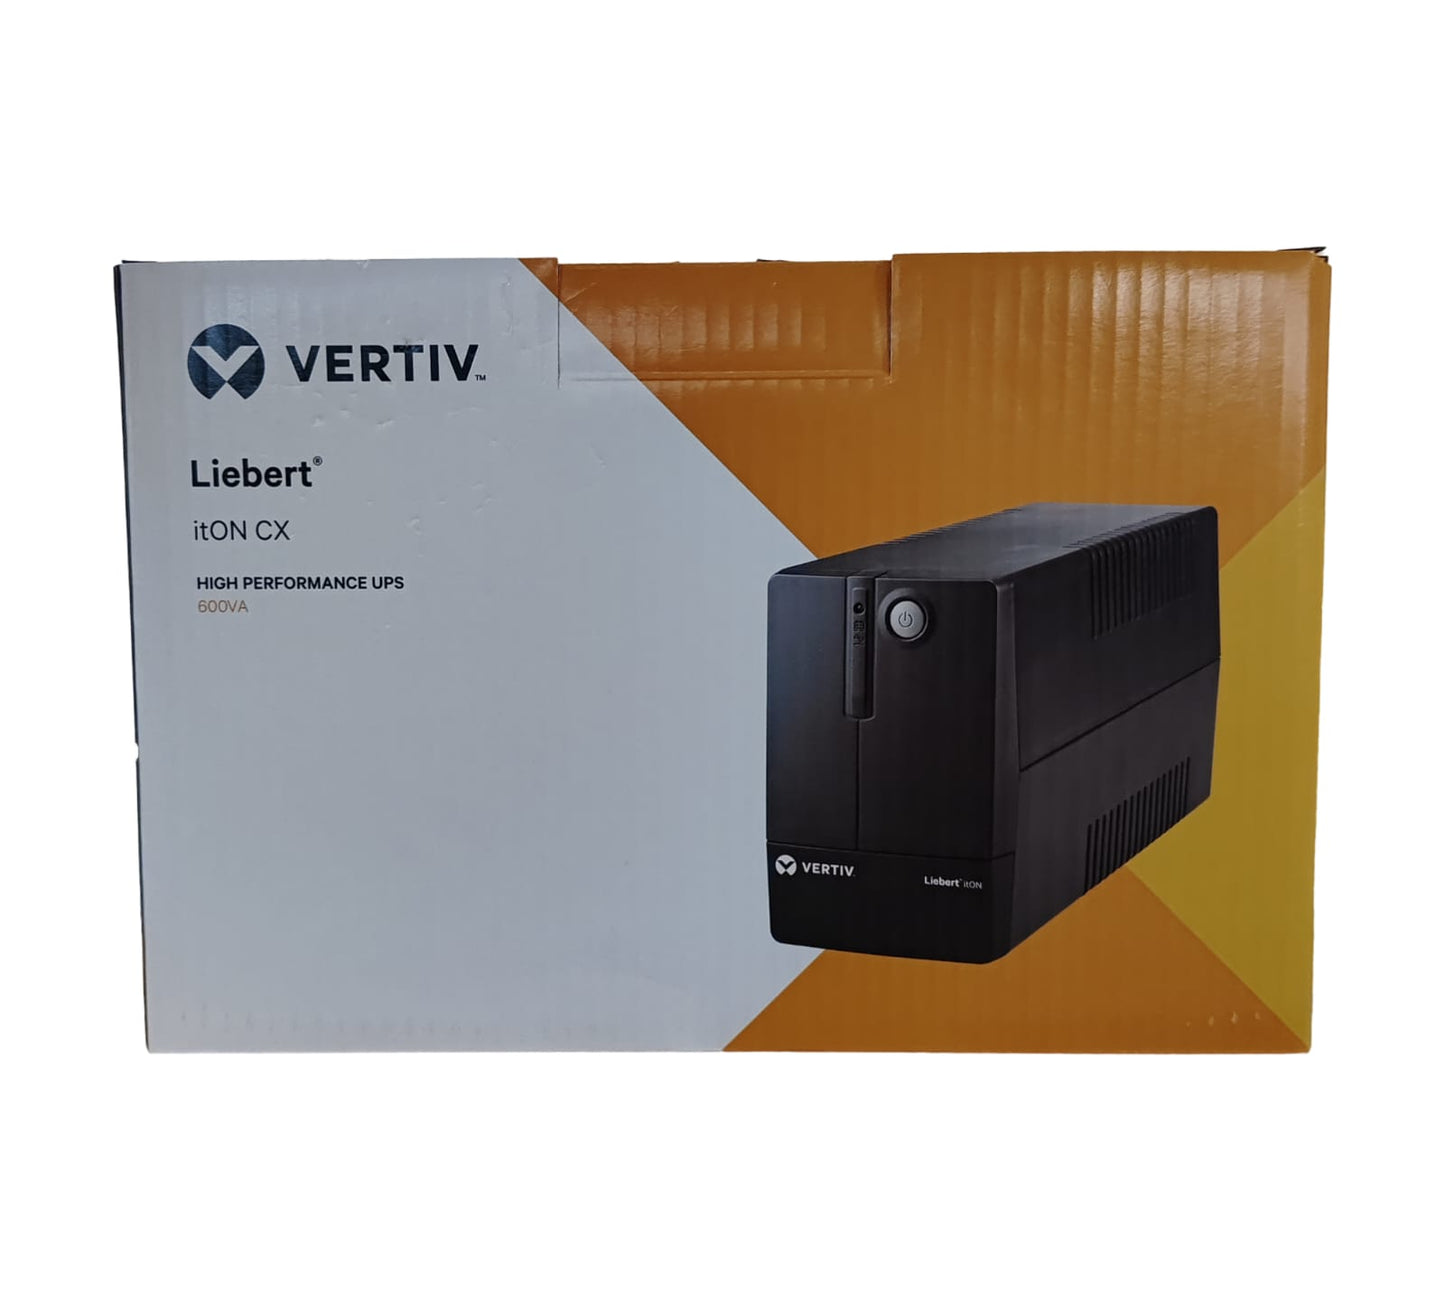 Vertiv From house of TATA